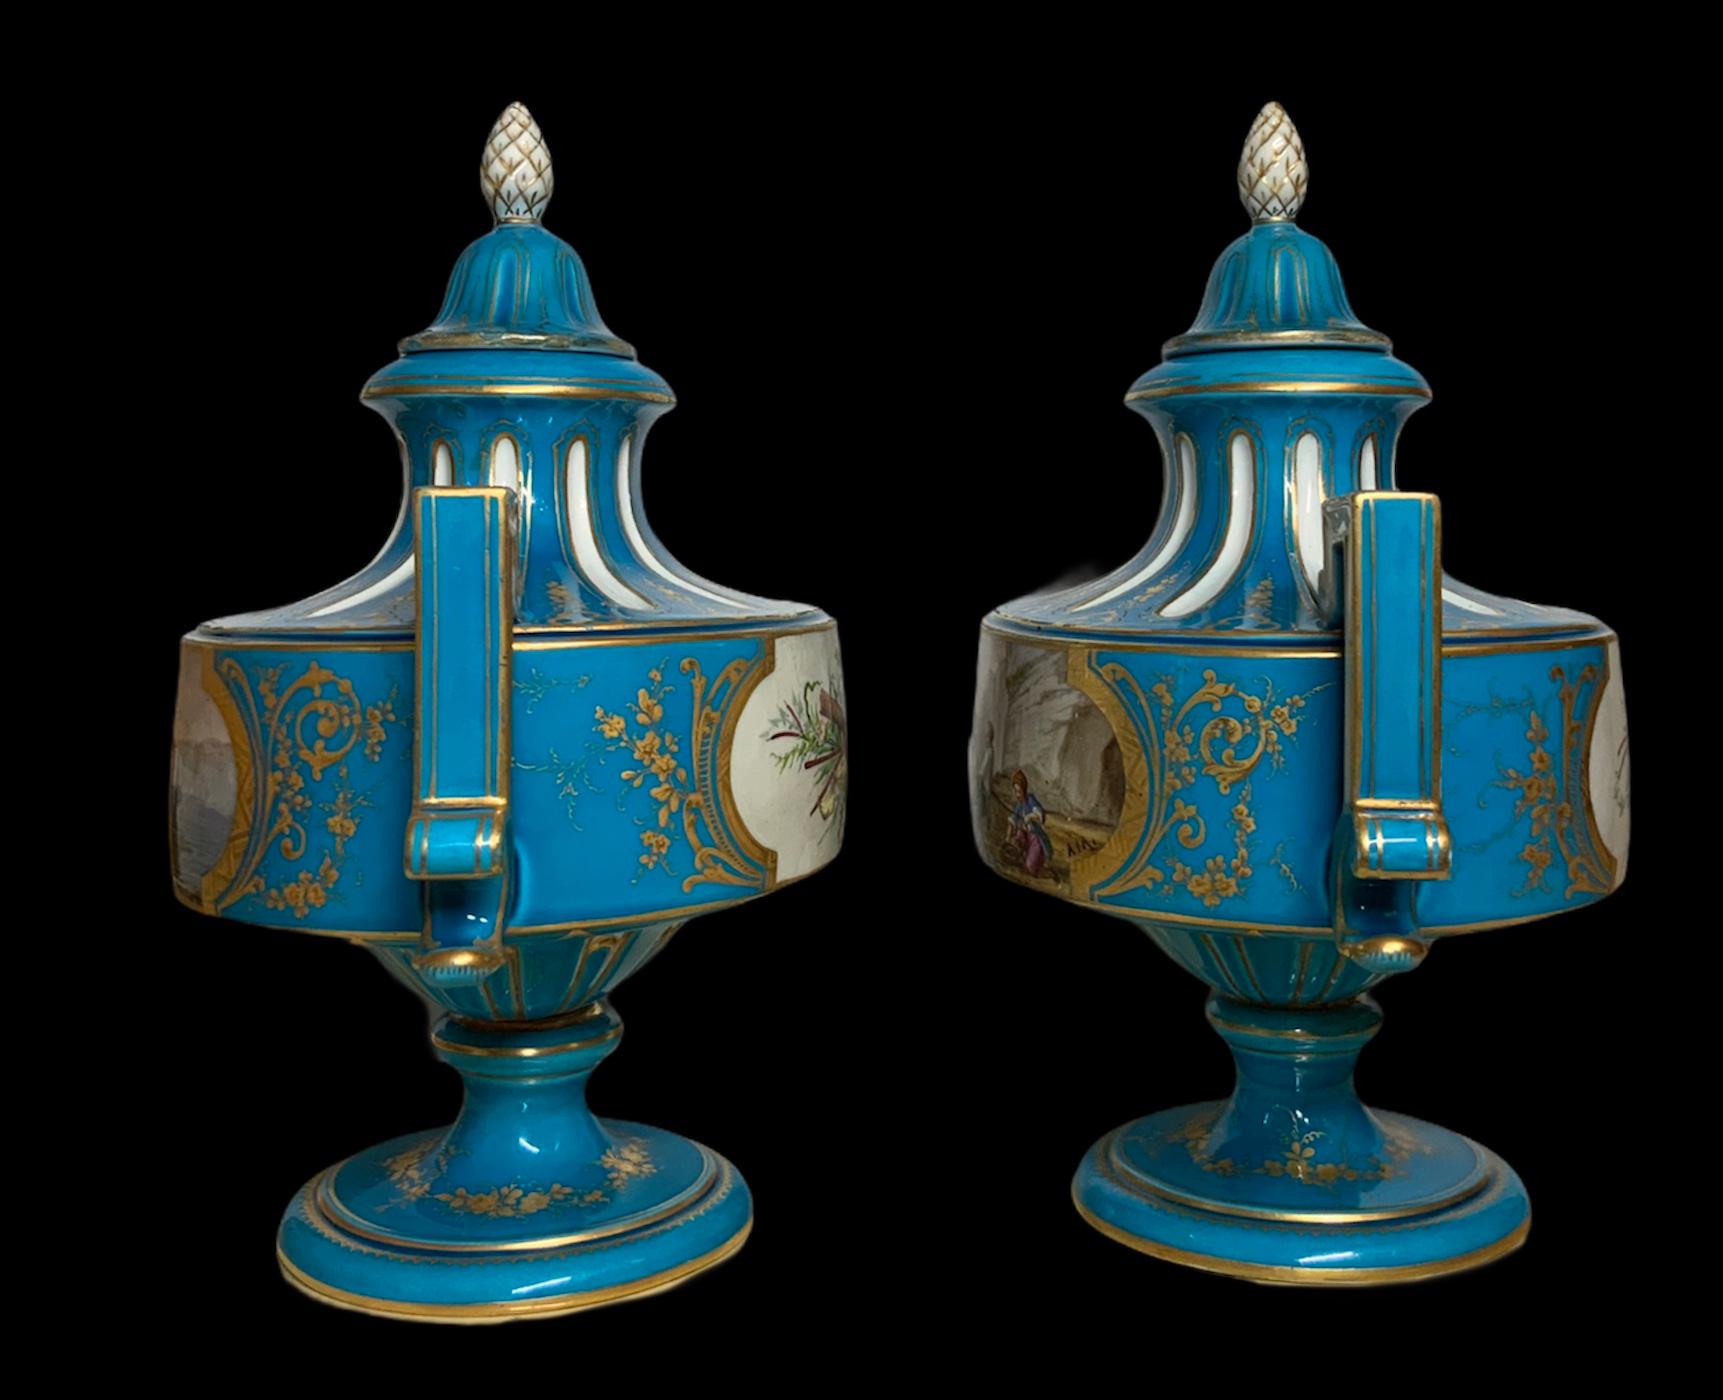 This is a pair of Sevres hand painted porcelain turquoise lidded urns. Both of them are depicting in the front a sea shore fishermen scenes. In one, a group of fishermen are preparing a sailboat and in the other one, they are pulling the net. The